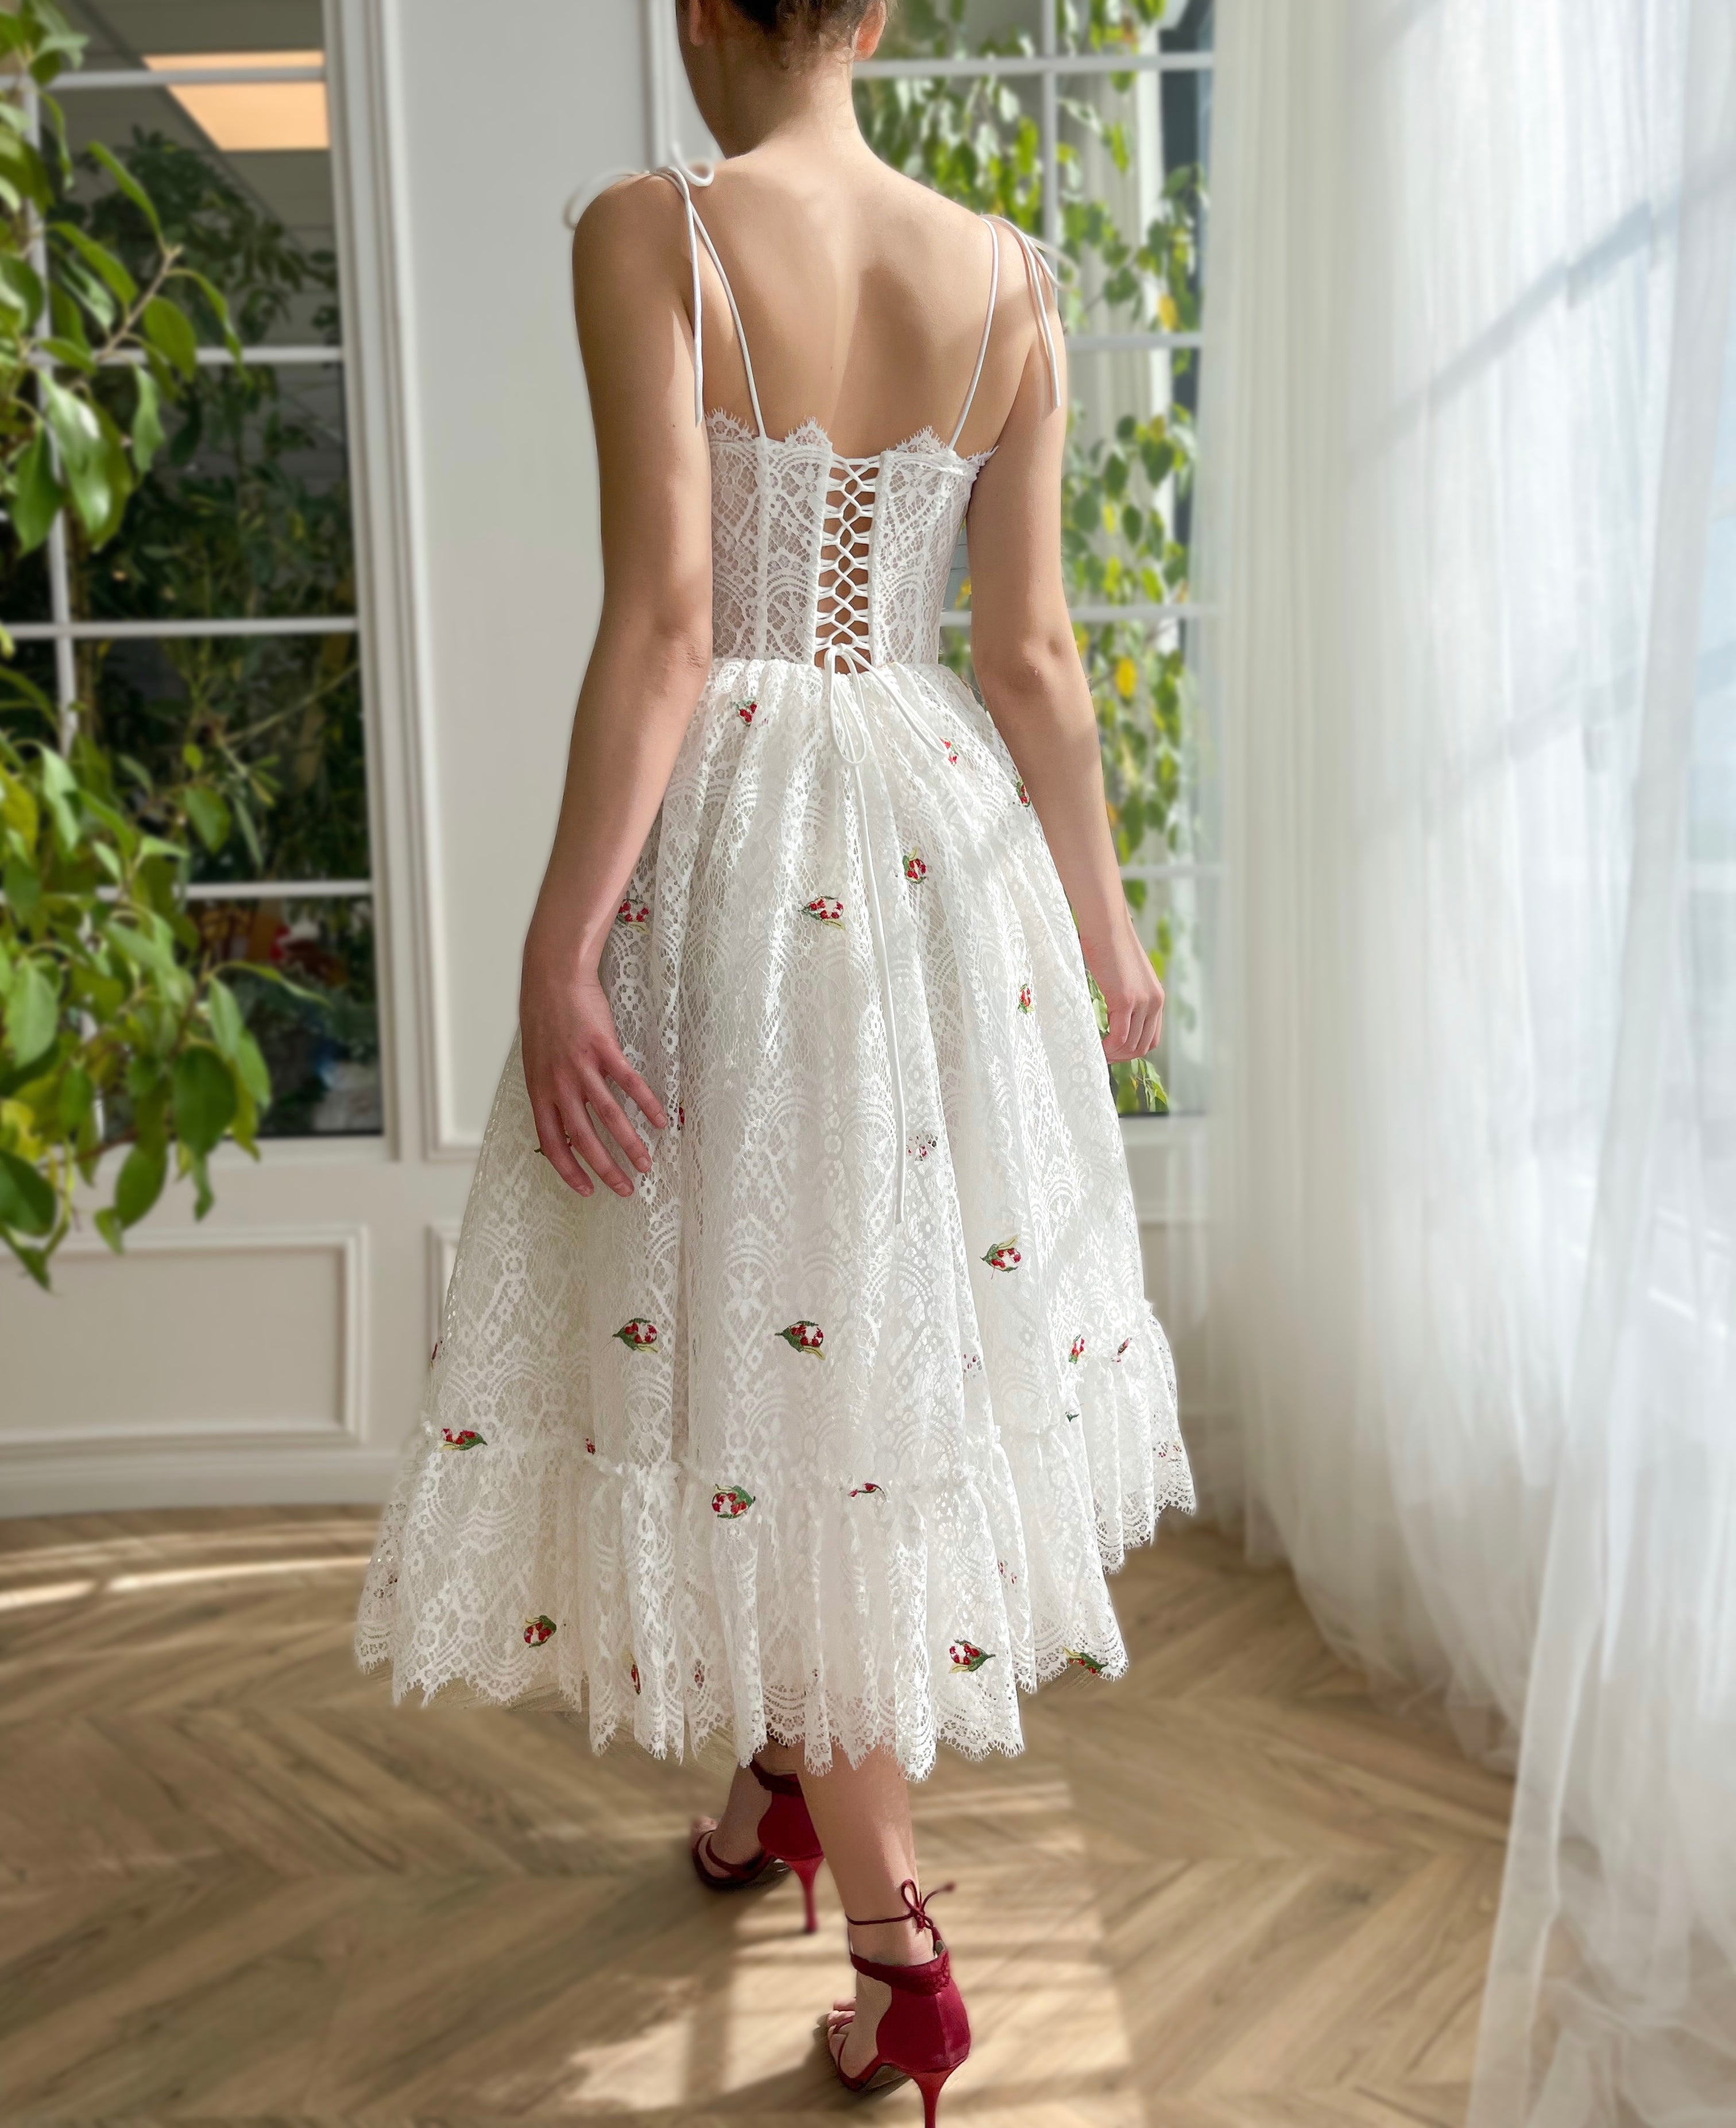 embroidered white dress